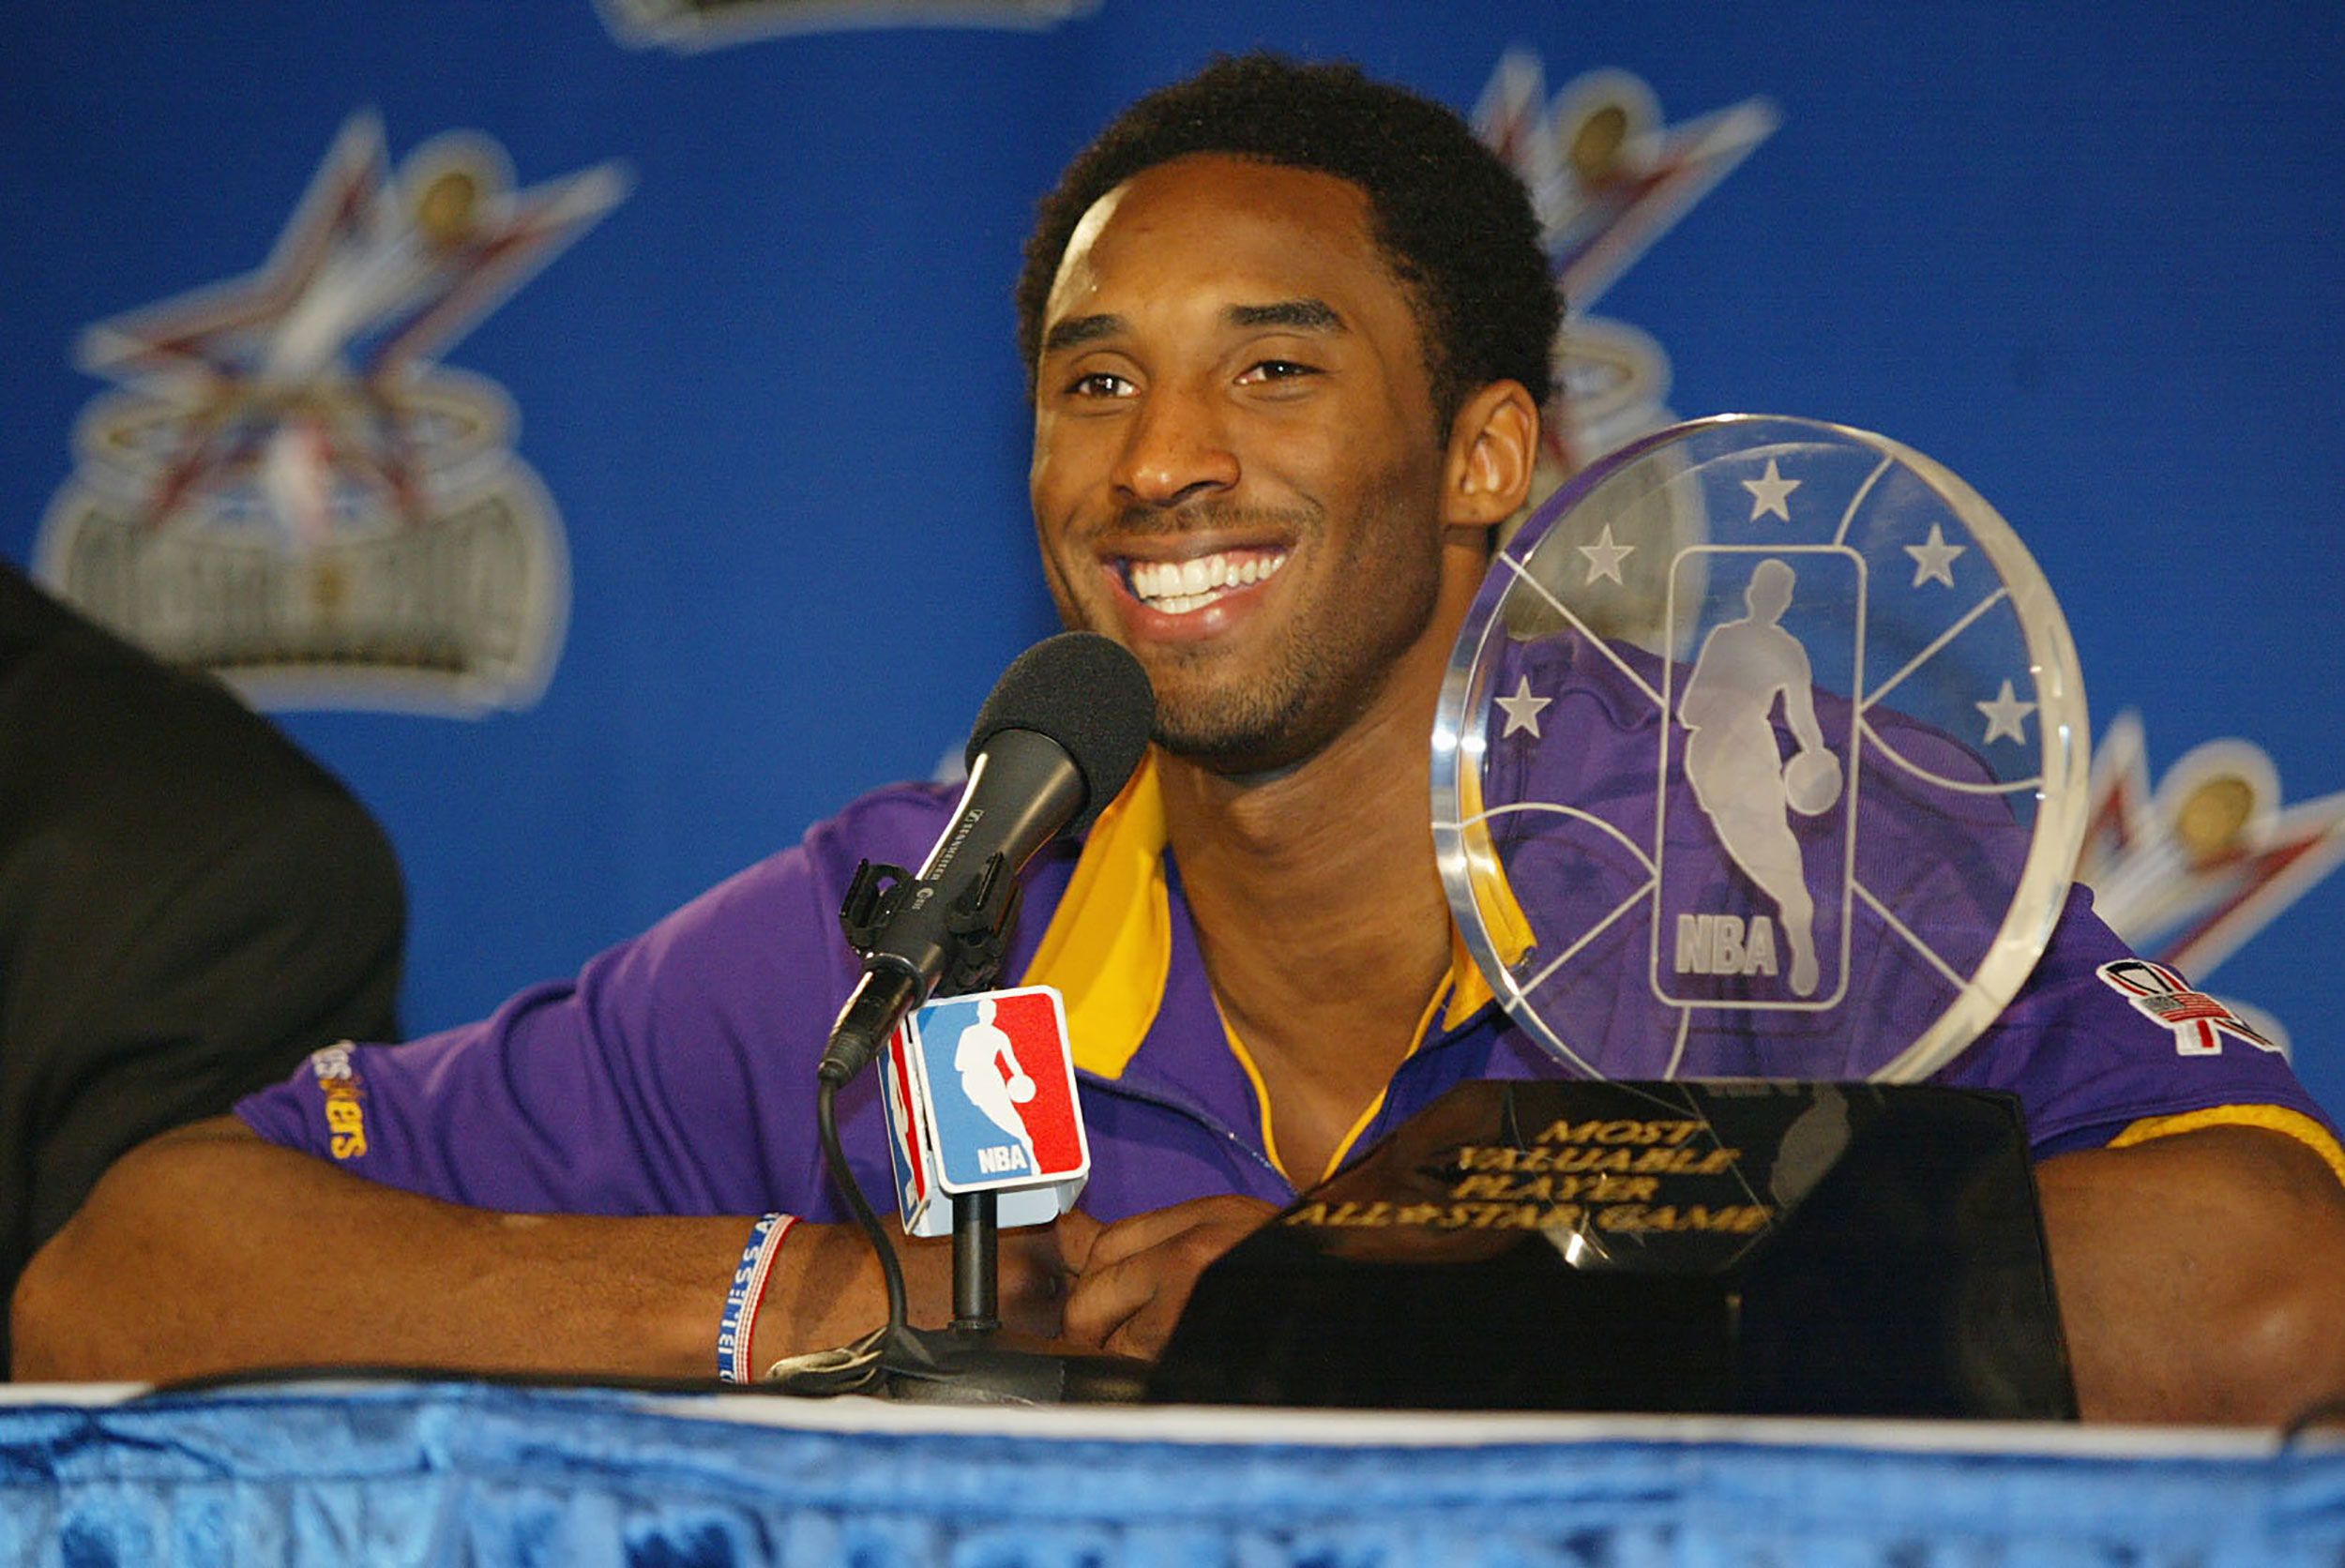 NBA All-Star Game MVP Award will now be known as the Kobe Bryant MVP Award